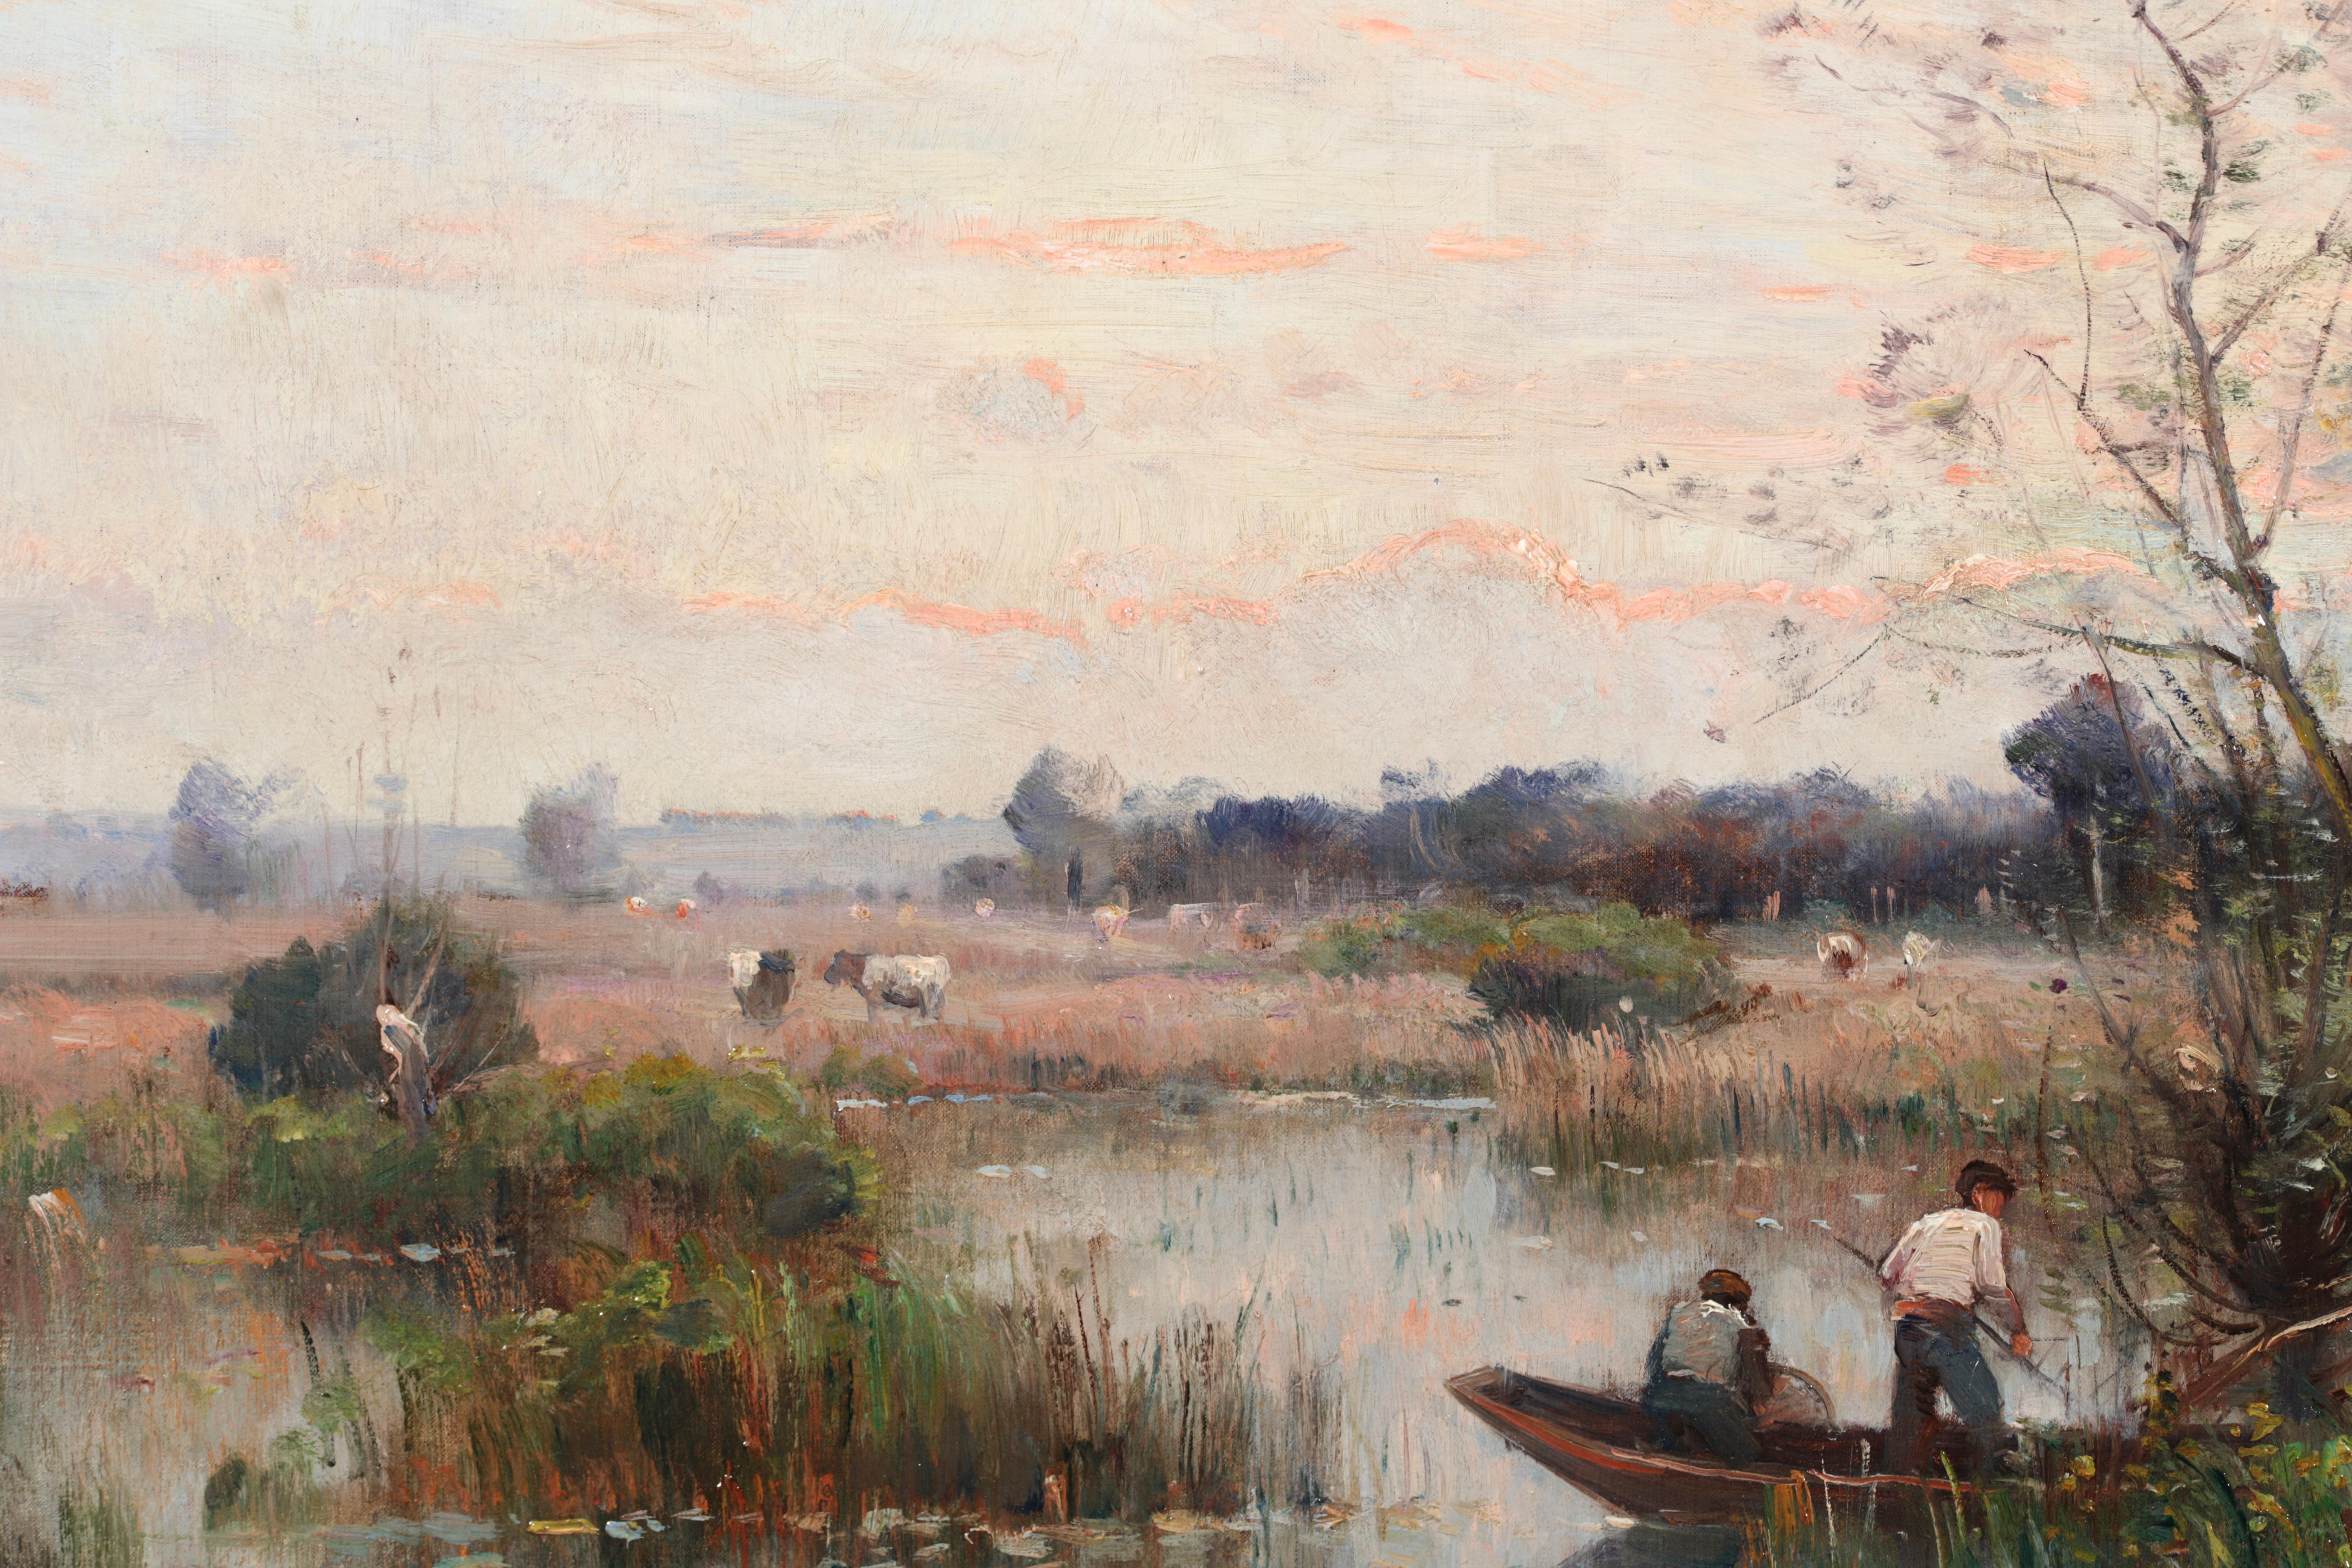 Signed and dated riverscape oil on canvas by French impressionist painter Louis Aime Japy. The work depicts two fisherman in a small punt in a river at sunset. The clouds in the sky are glowing pink by the fading sun and below cattle are grazing in